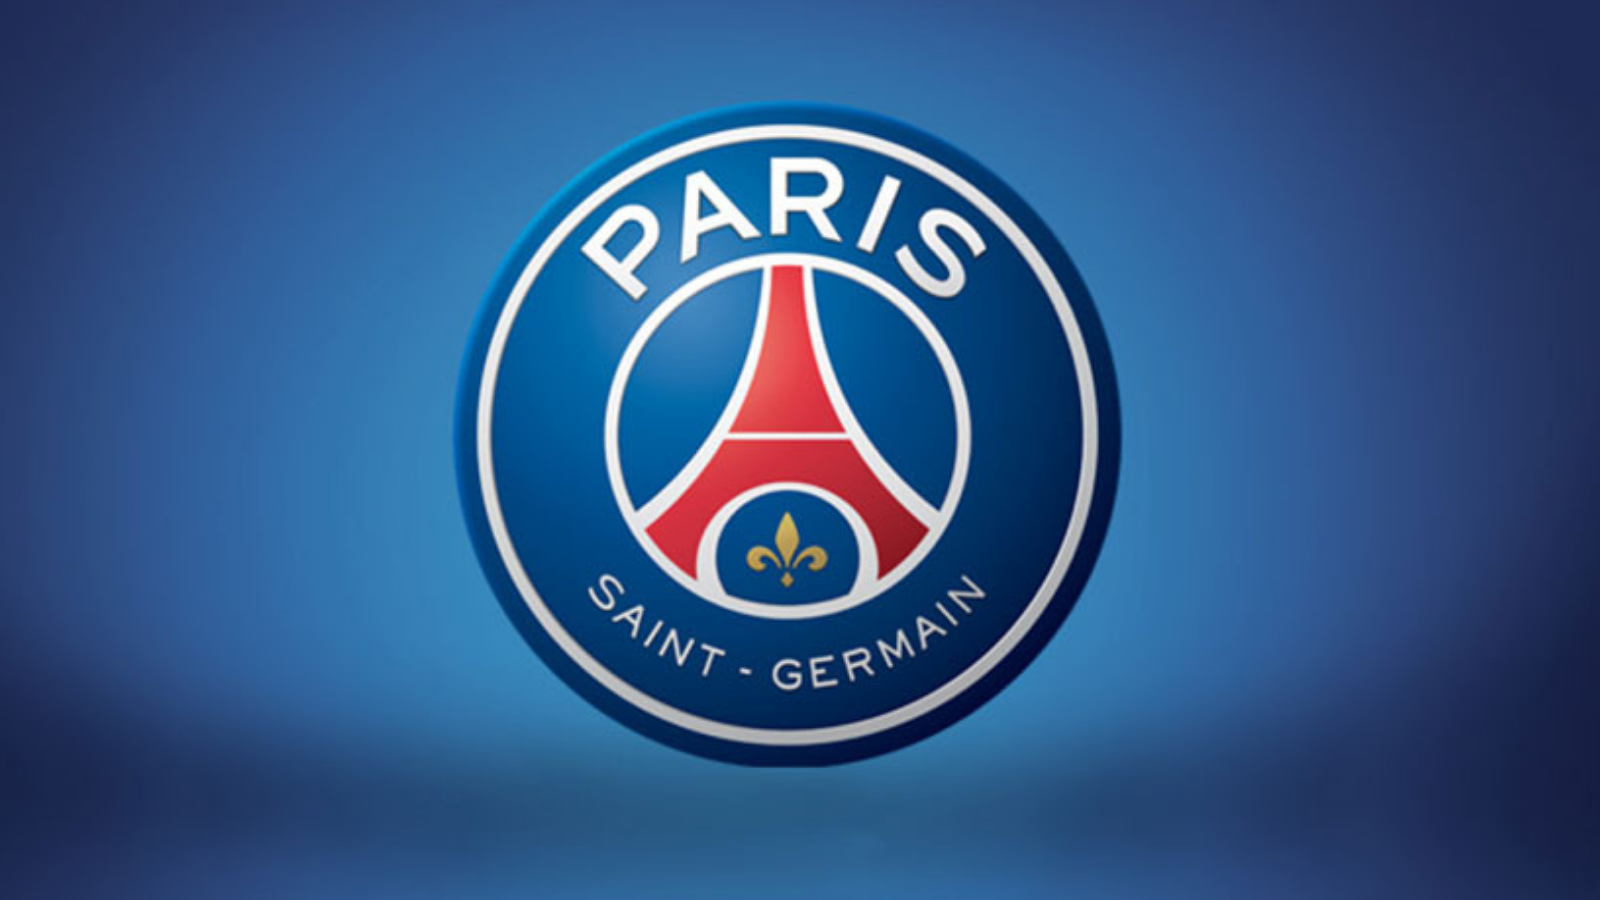 Paris SaintGermain Becomes First Football Club Ever To Launch Own